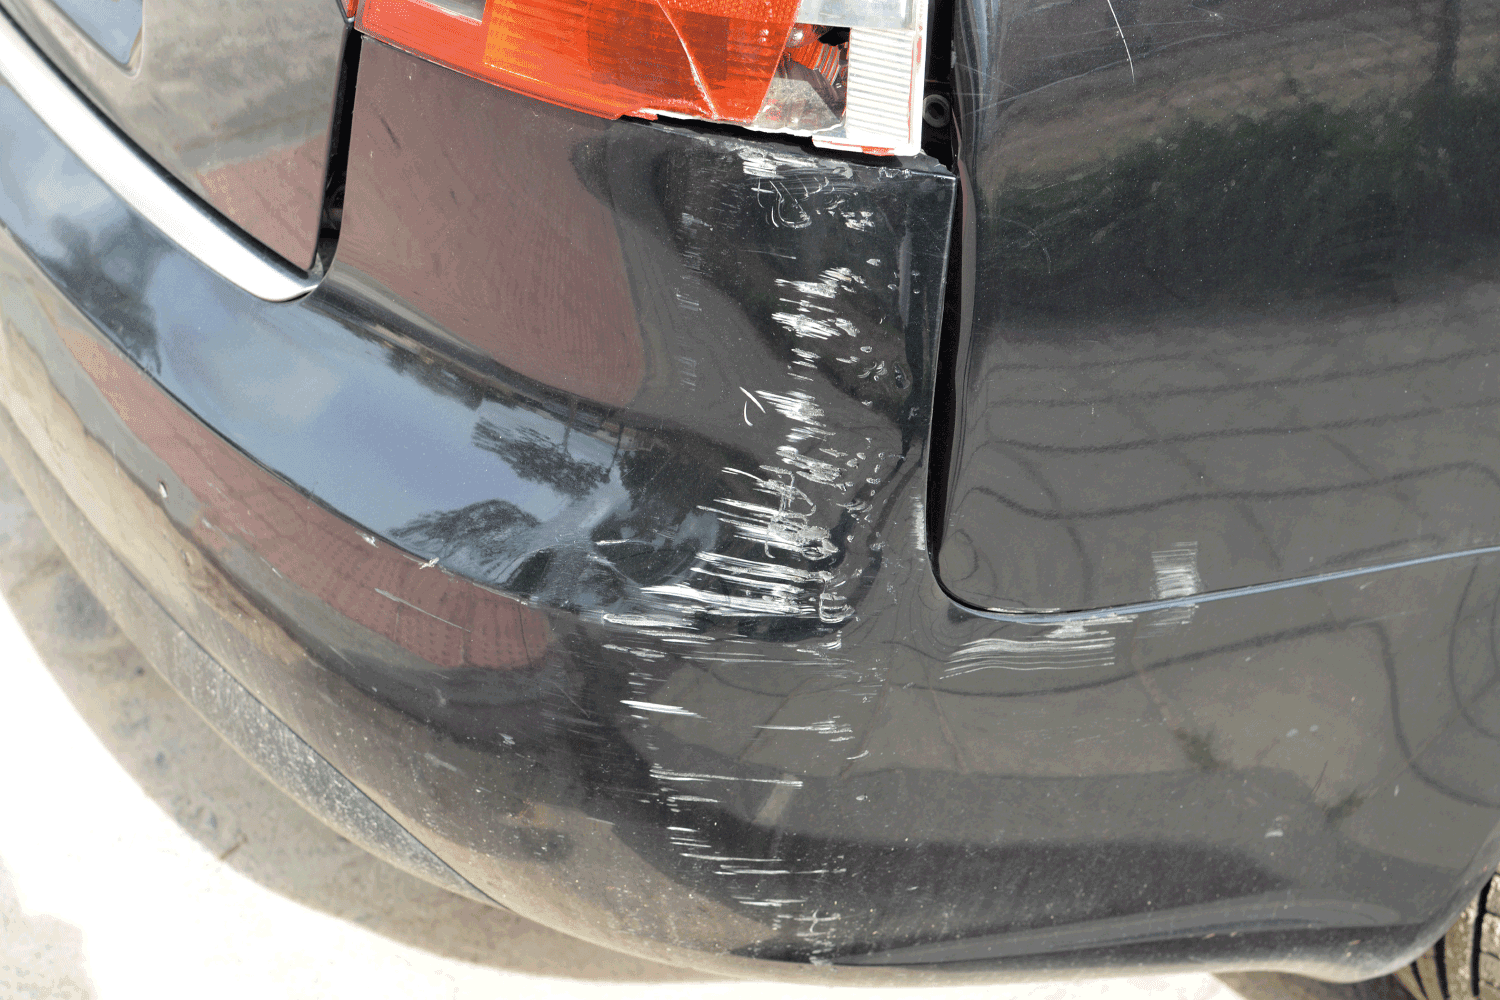 Close up of scratches and white scuff marks on rear end of black car